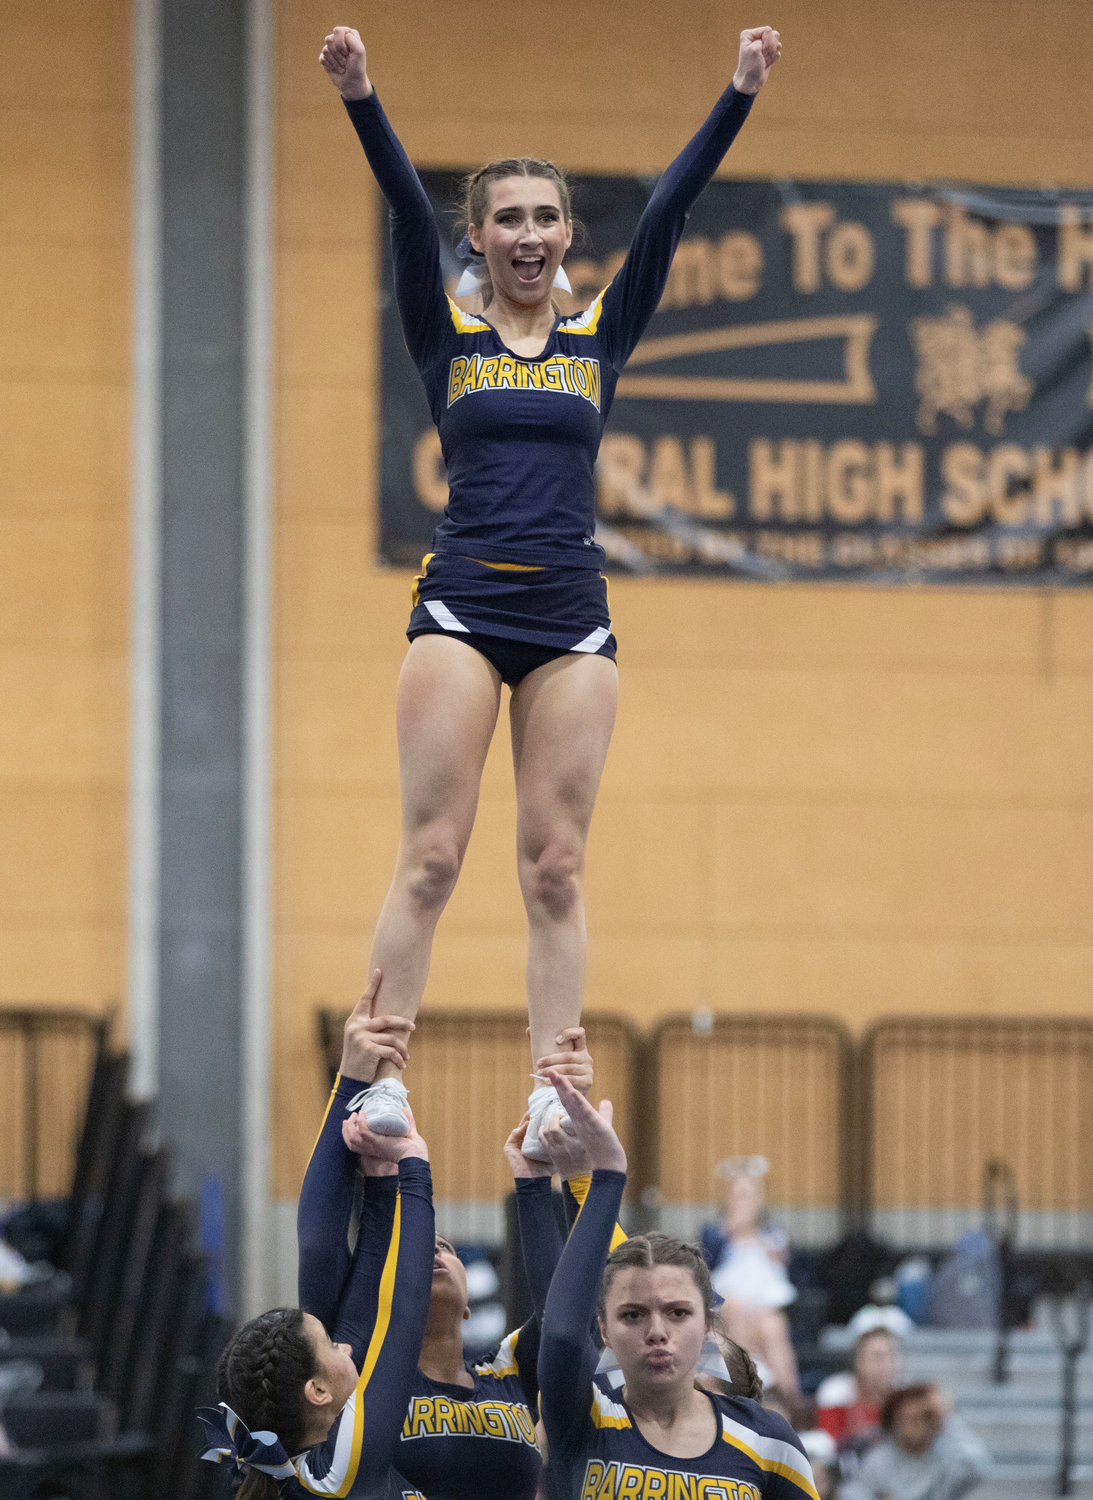 Barrington’s Kaleigh Moran (top) and her teammates perform at the Rhode Island Interscholastic League Division II Cheer Competition.